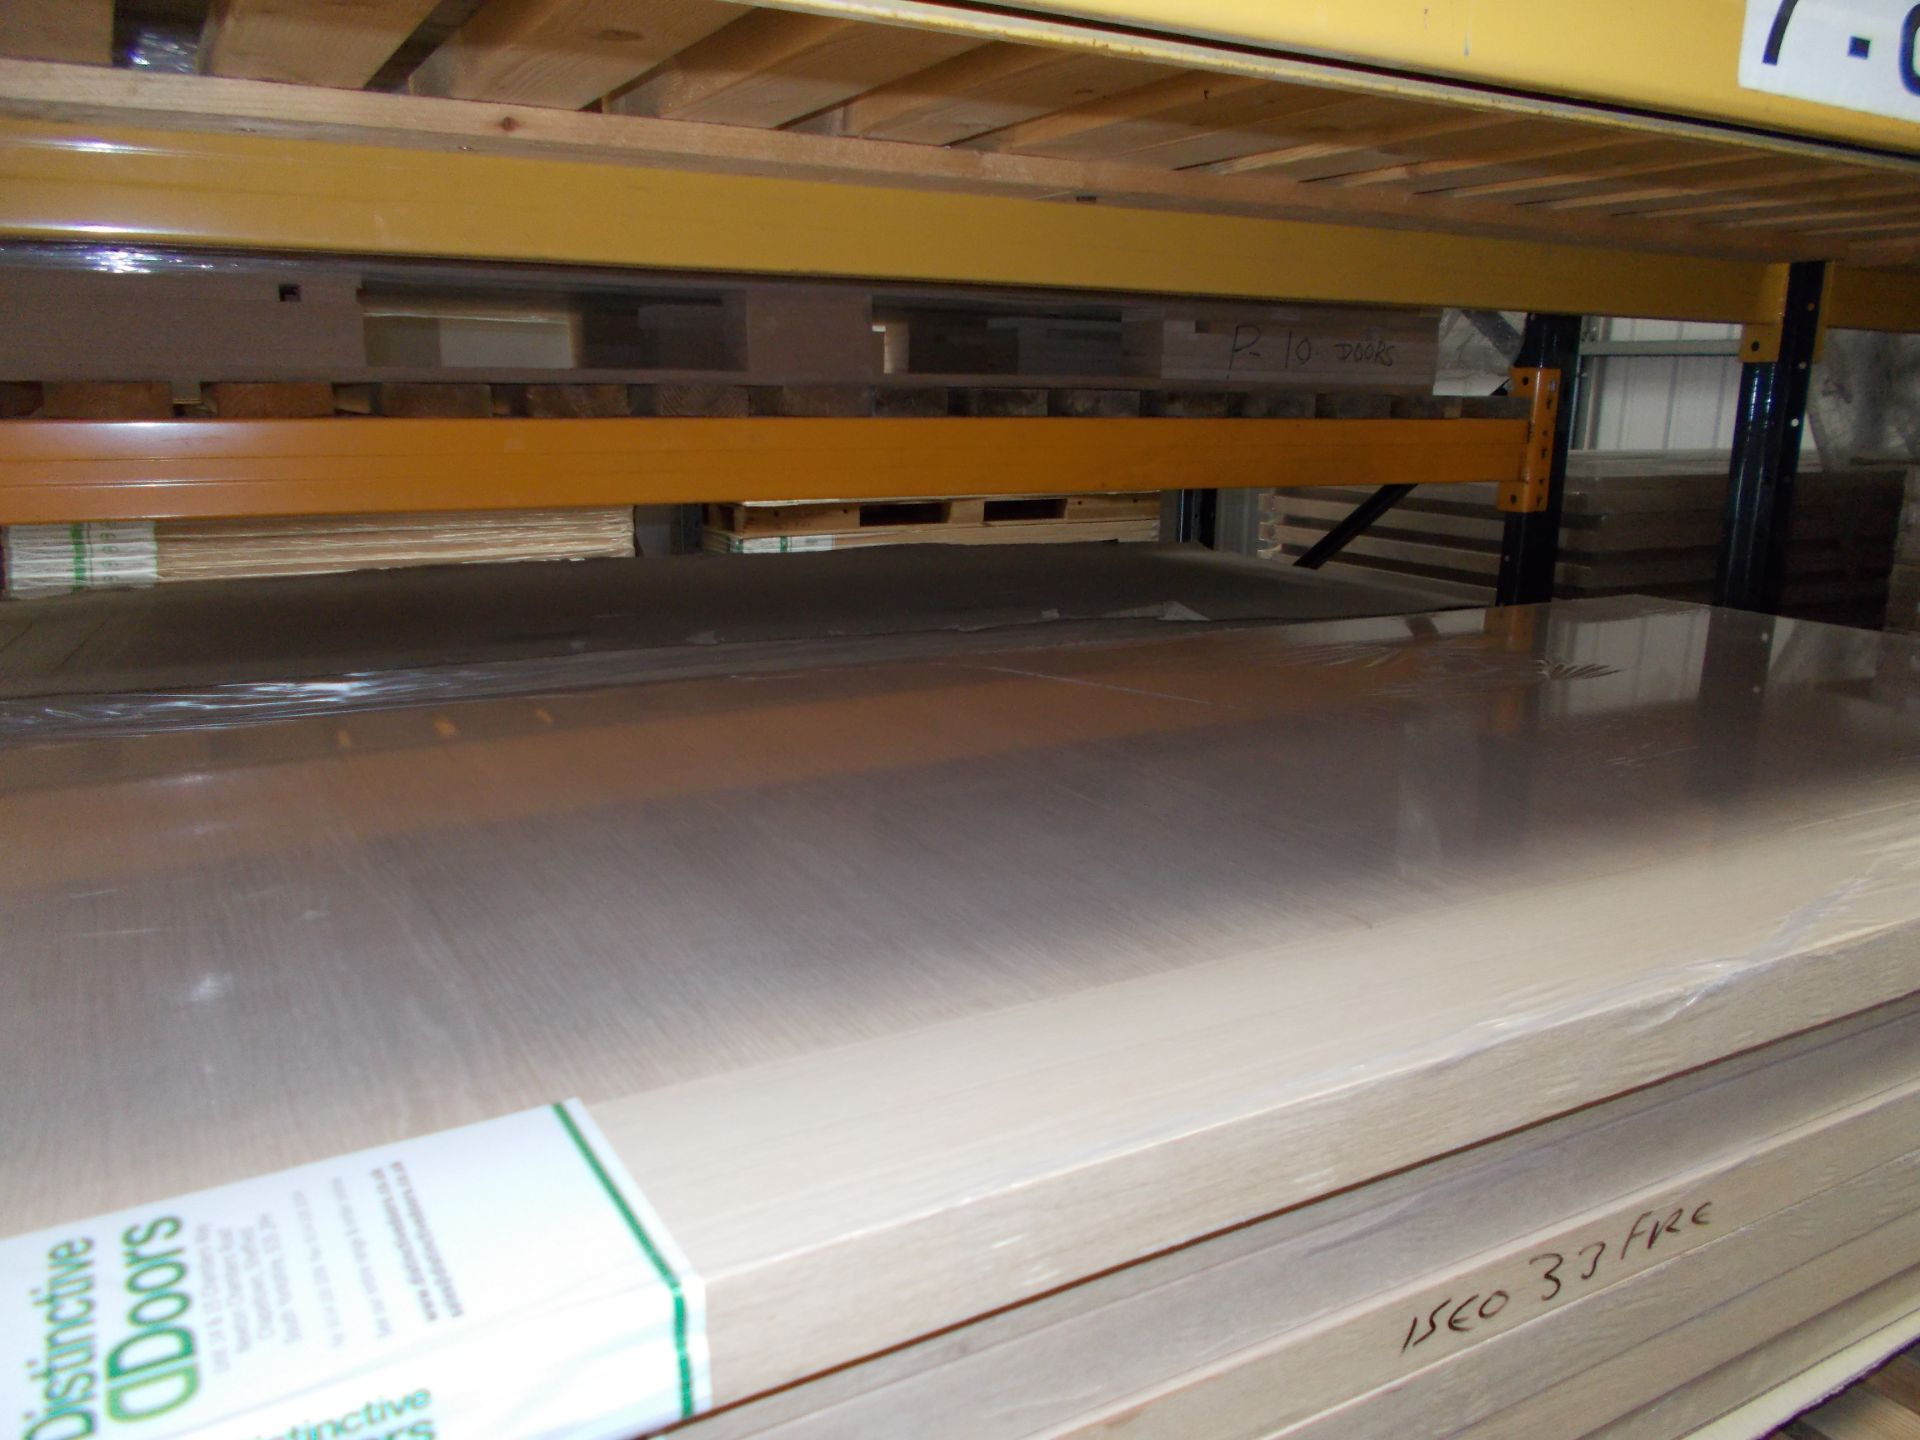 3 x Iseo K4500 5 Panel Oak Veneer FD30 ISK450033FD, 78”x33x44mm - Lots to be handed out in order - Image 3 of 3